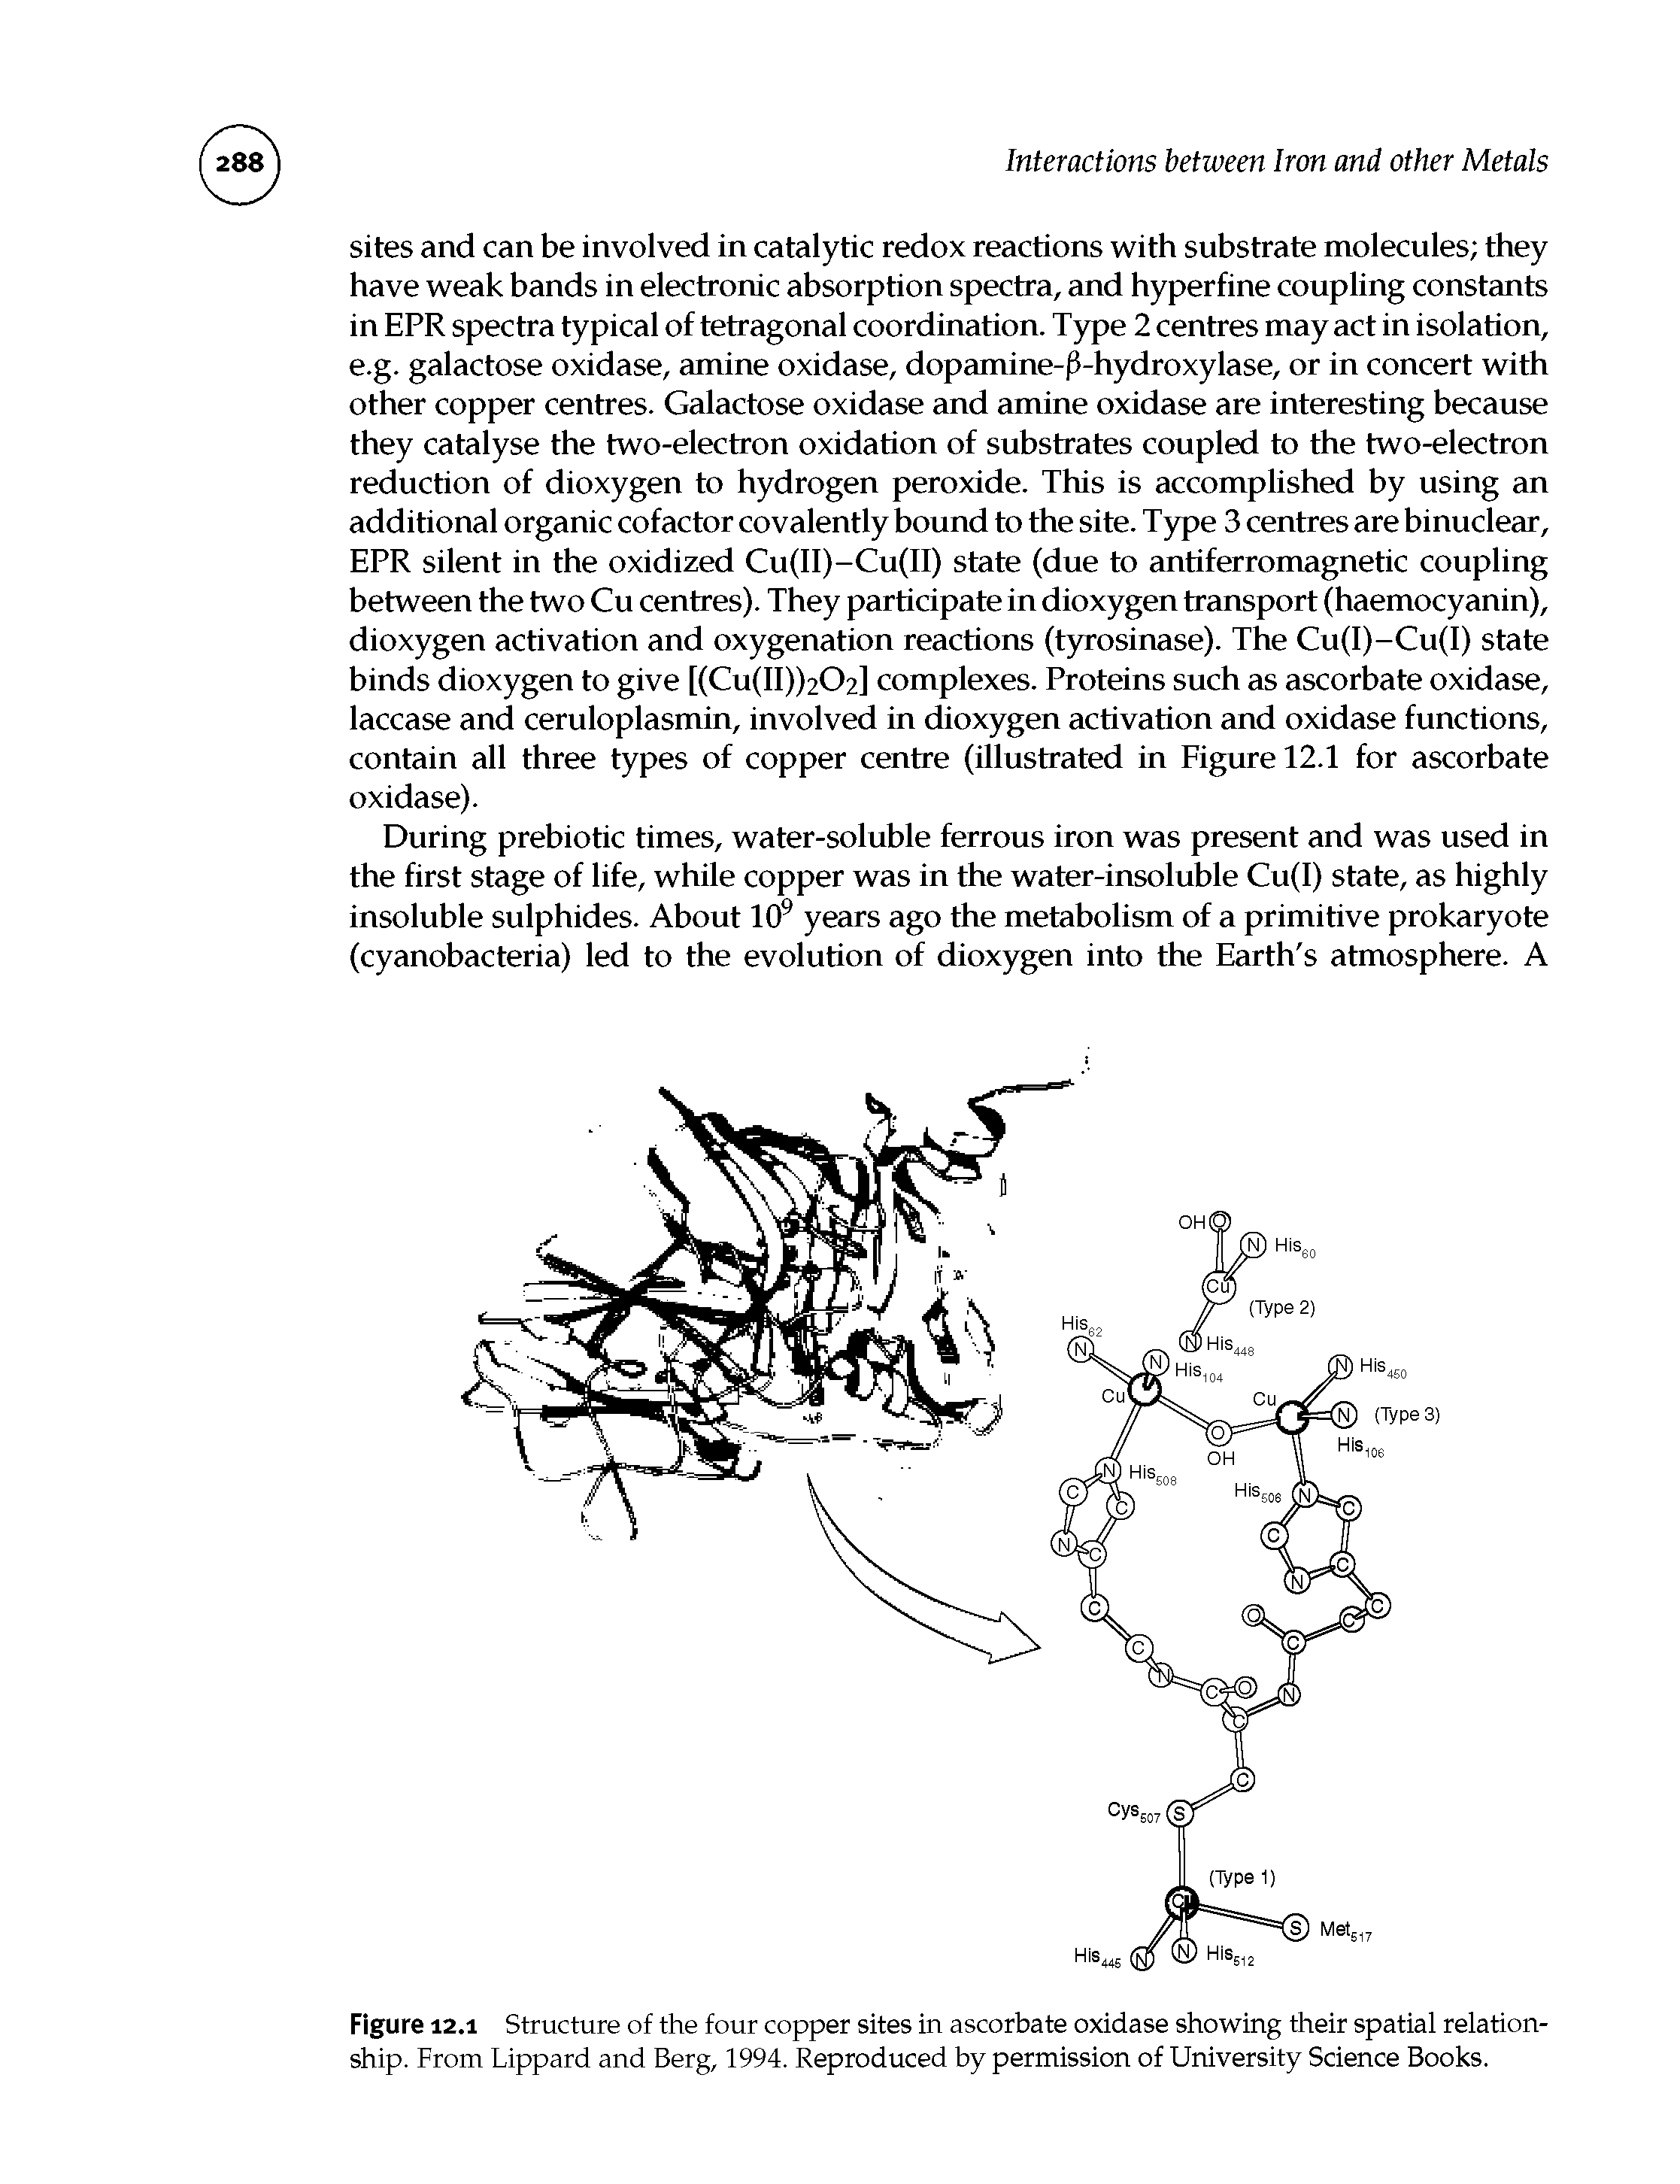 Figure 12.1 Structure of the four copper sites in ascorbate oxidase showing their spatial relationship. From Lippard and Berg, 1994. Reproduced by permission of University Science Books.